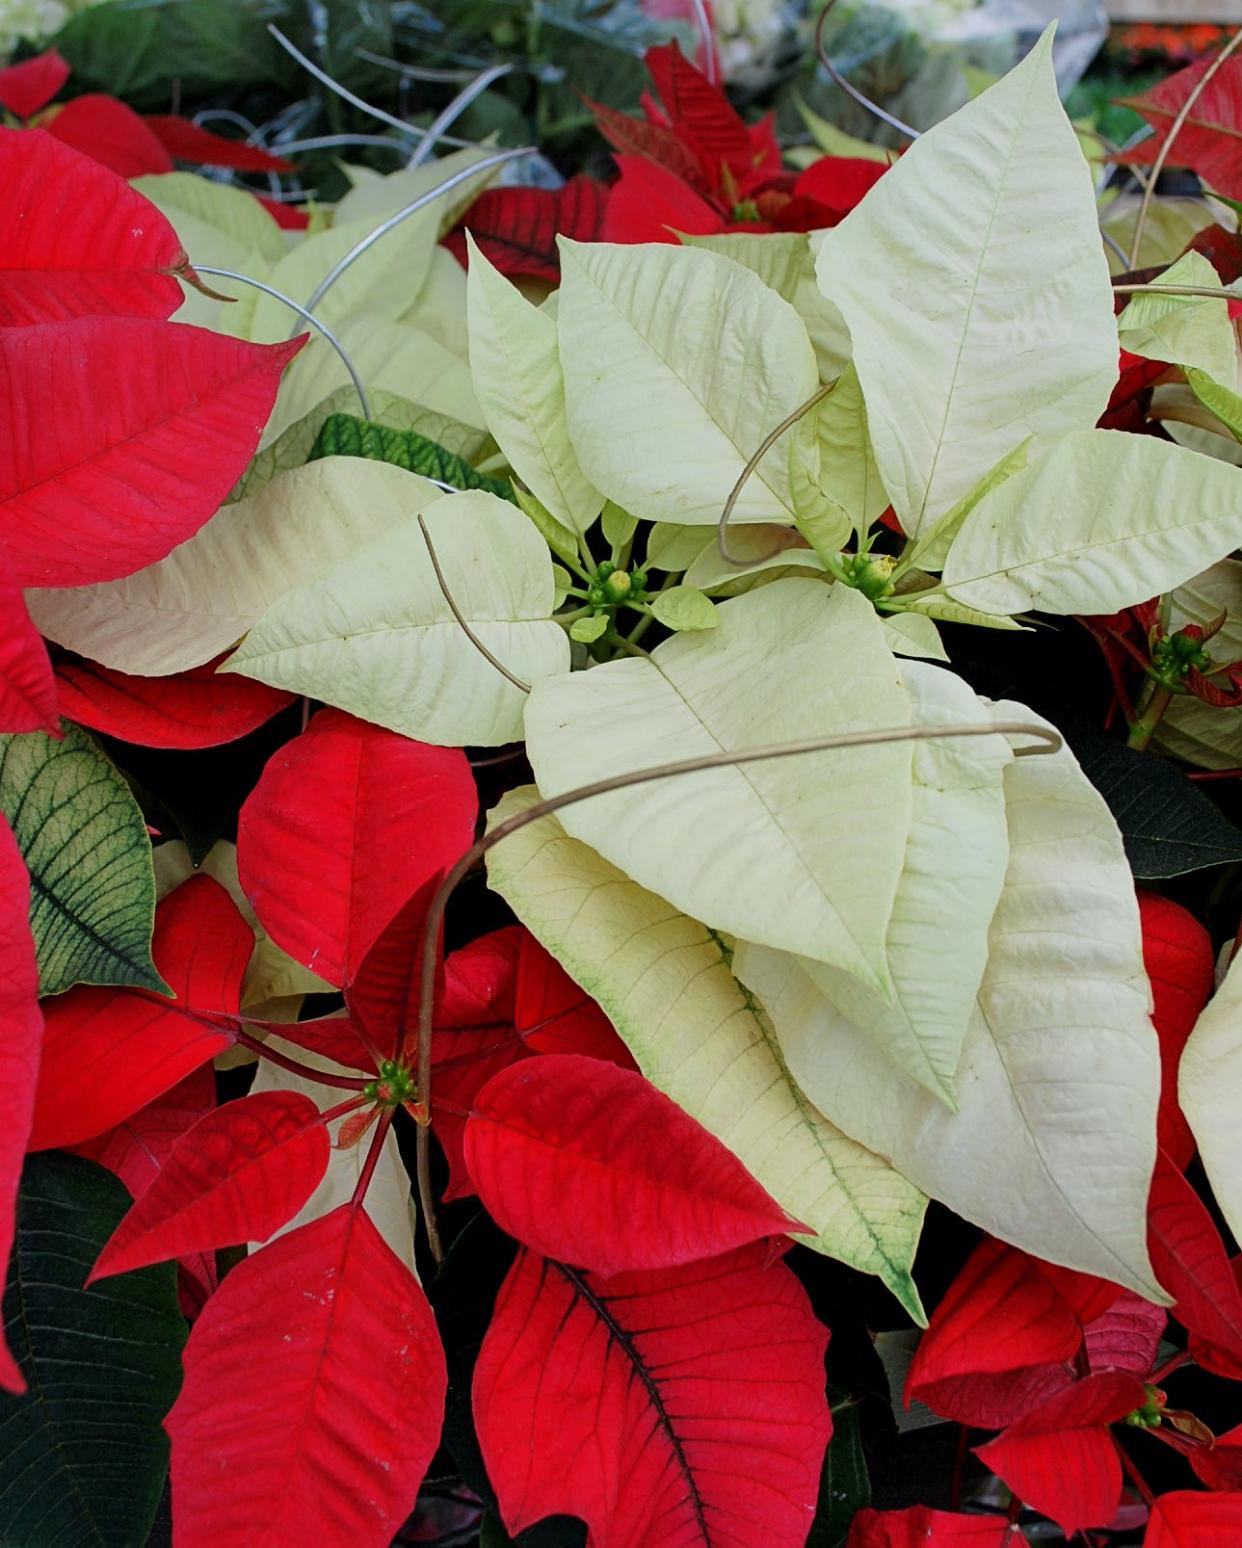 Use potted and cut poinsettias for decoration for the holidays. Poinsettias have been reported to be poisonous; they are not. A study at Ohio State University revealed that a 50-pound child would have to eat more than 500-600 Poinsettia leaves to have any serious adverse side effects. This is not to say that there could be some effects; the most common side effects from poinsettia ingestions are upset stomach and vomiting.